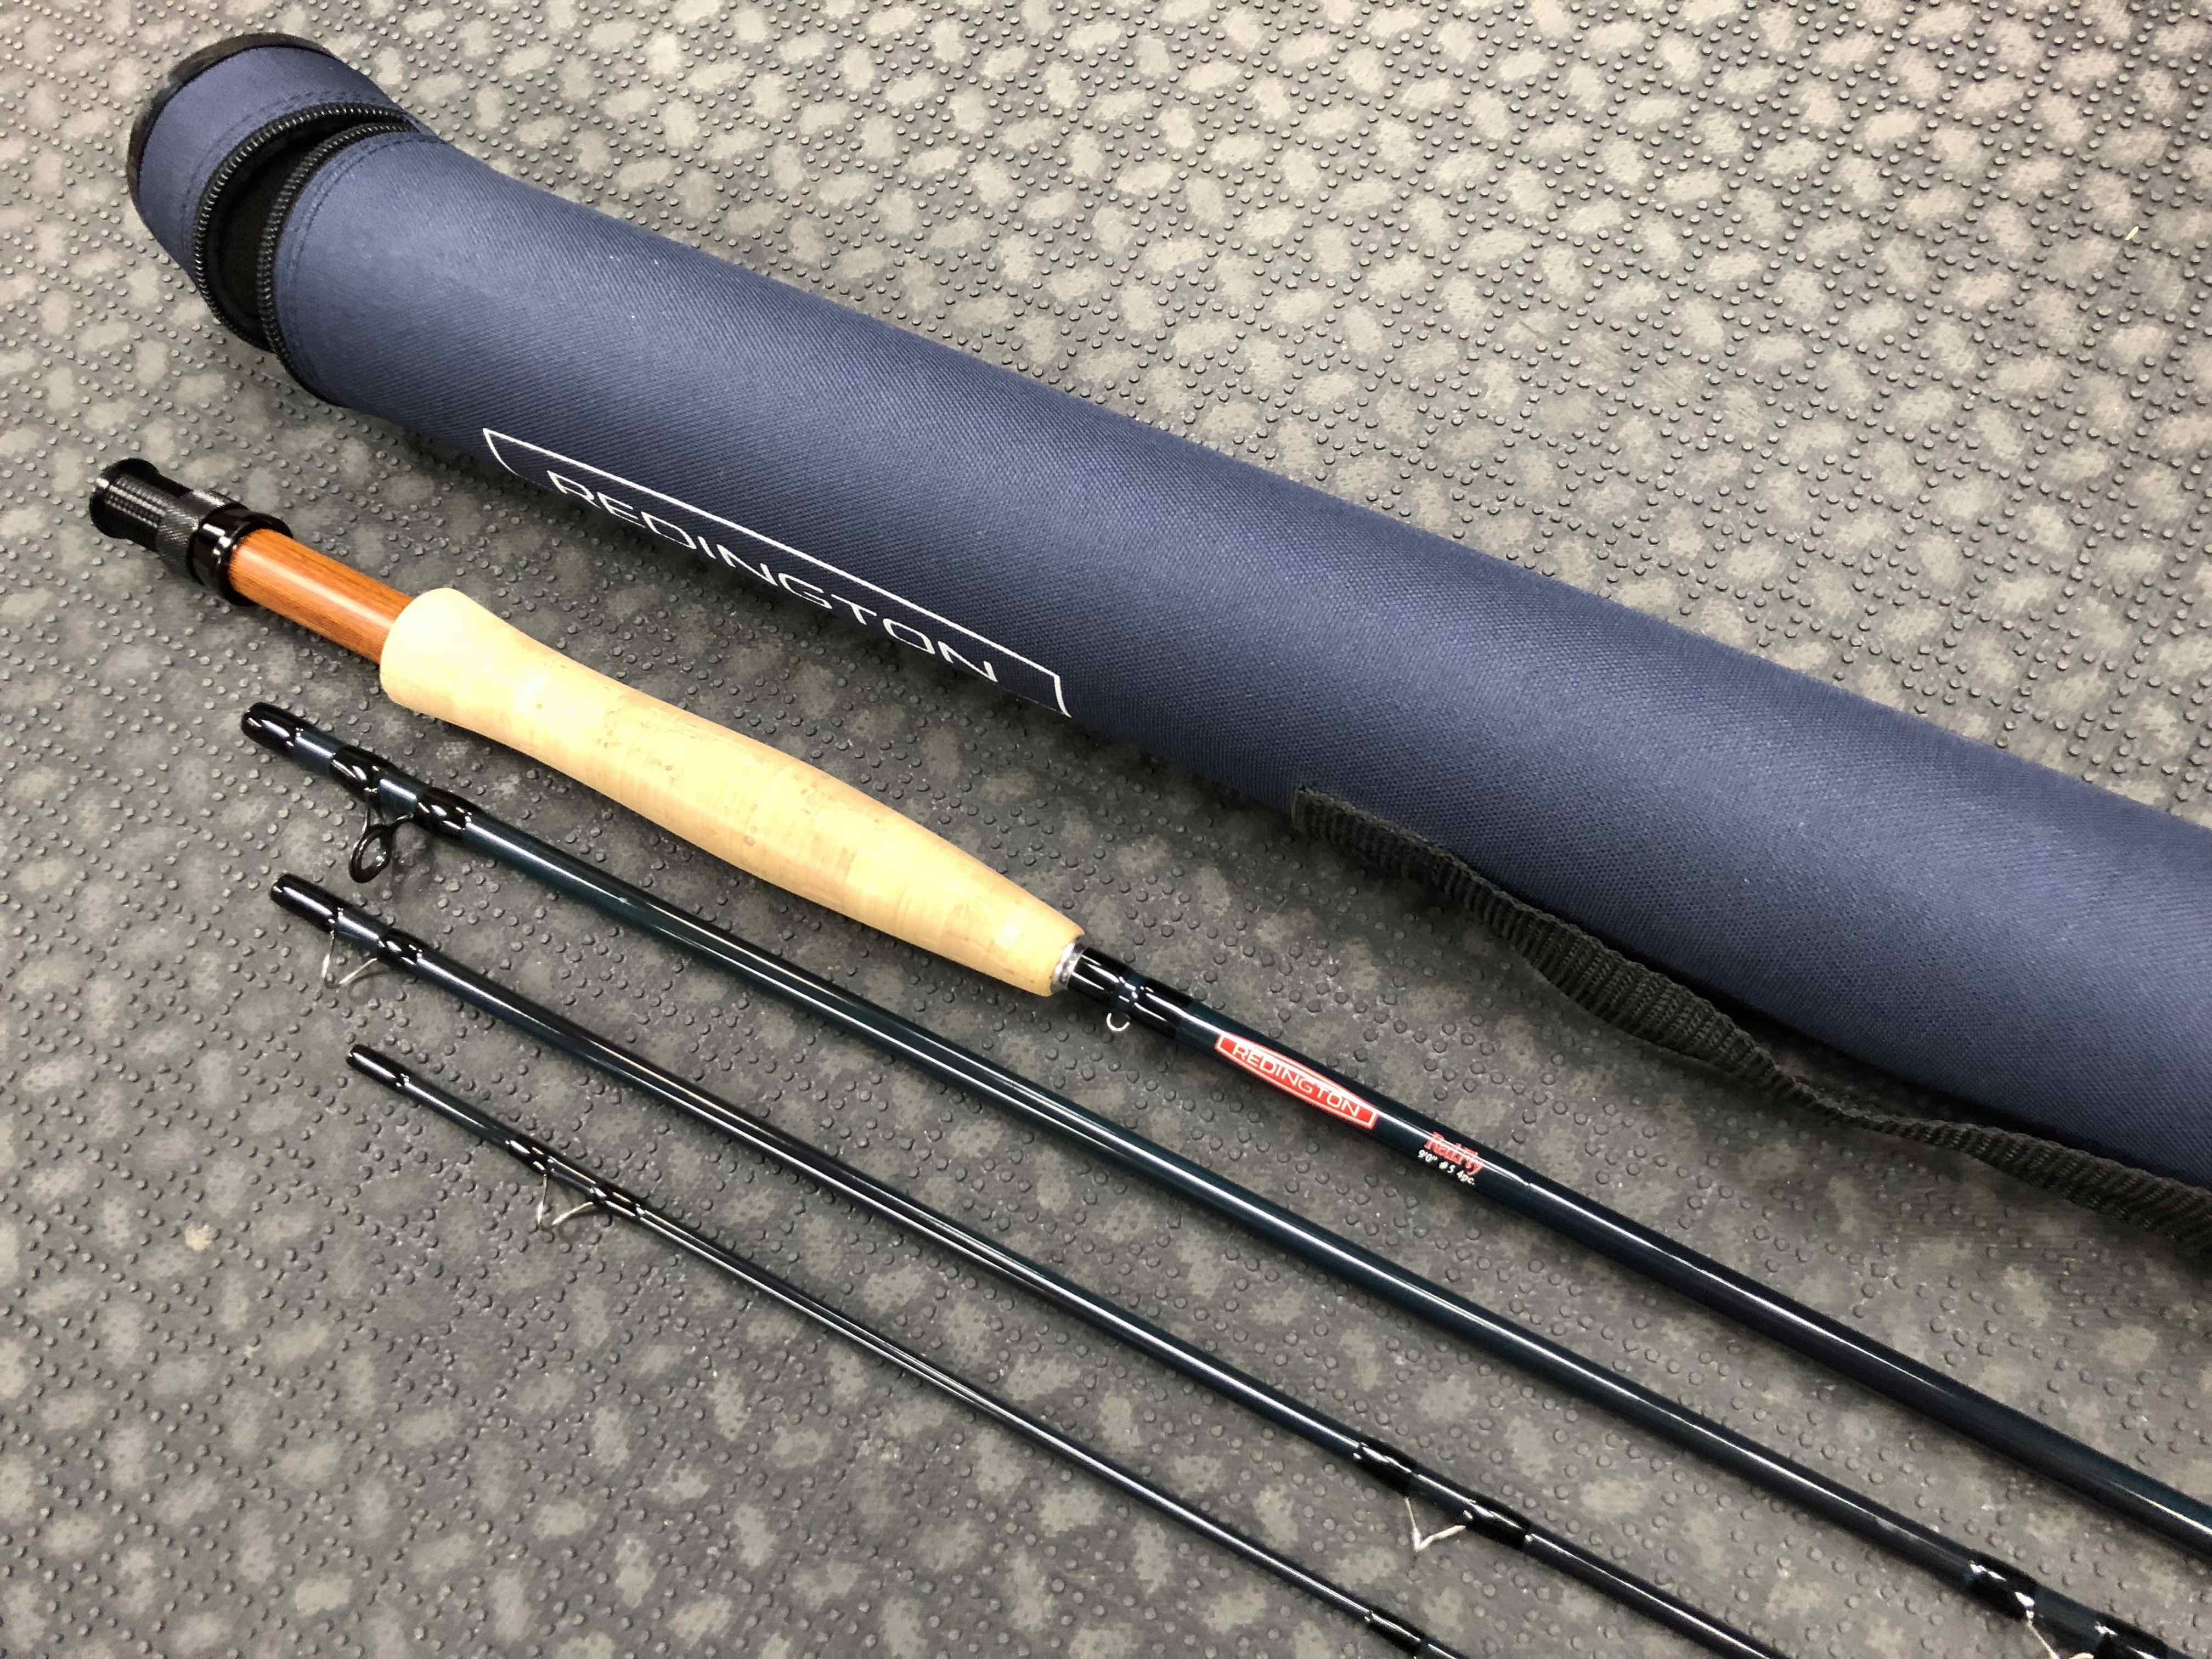 https://thefirstcast.ca/wp-content/uploads/2018/03/Redington-Red-Fly-9foot-4piece-5-weight-Fly-Rod-AA.jpg